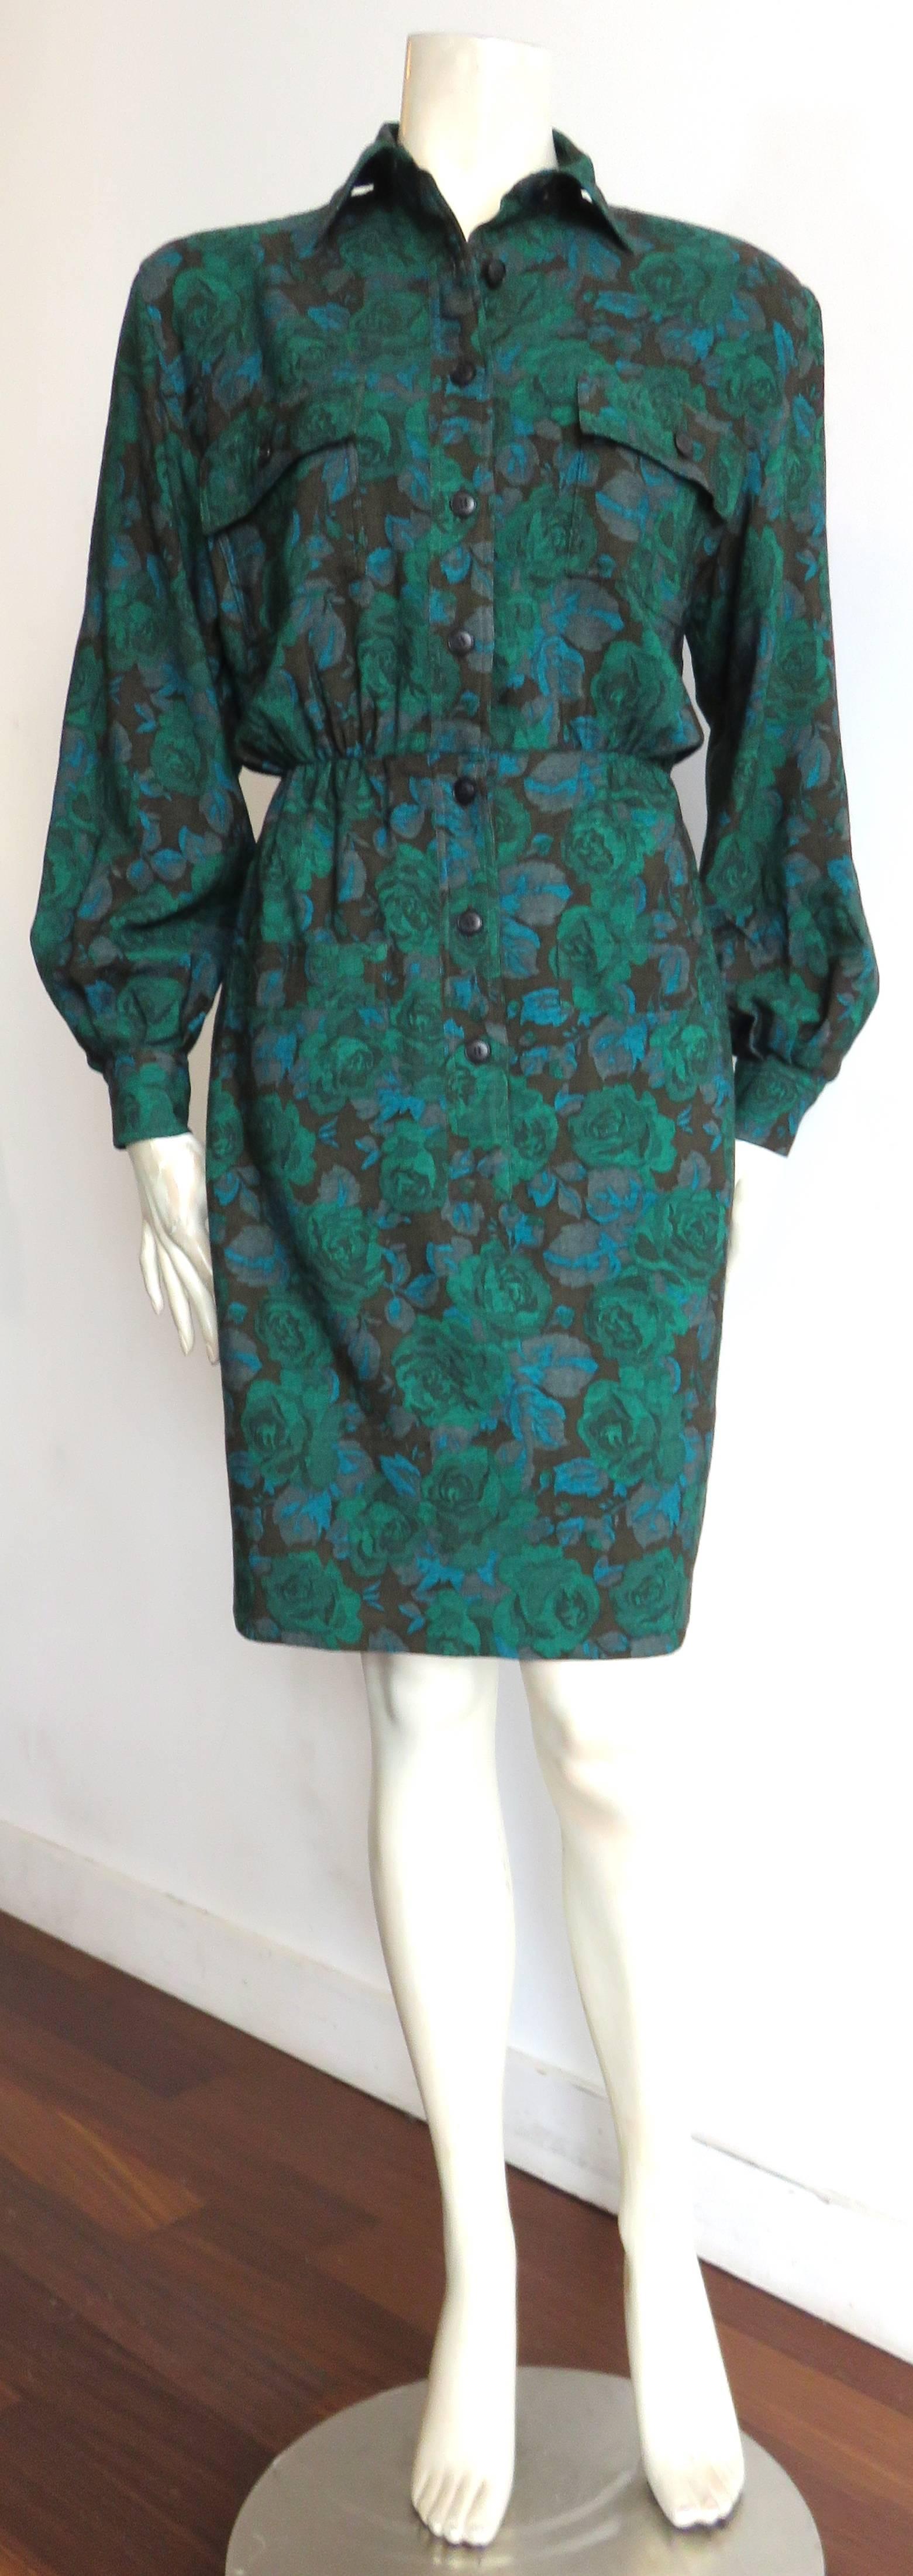 Excellent condition, 1980's JEAN-LOUIS SCHERRER Floral Challis day dress.

Numbered boutique dress: '507497'.

This gorgeous day dress features wool and silk Challis, woven fabric in sumptuous shades of emerald green, and peacock blue.

Button